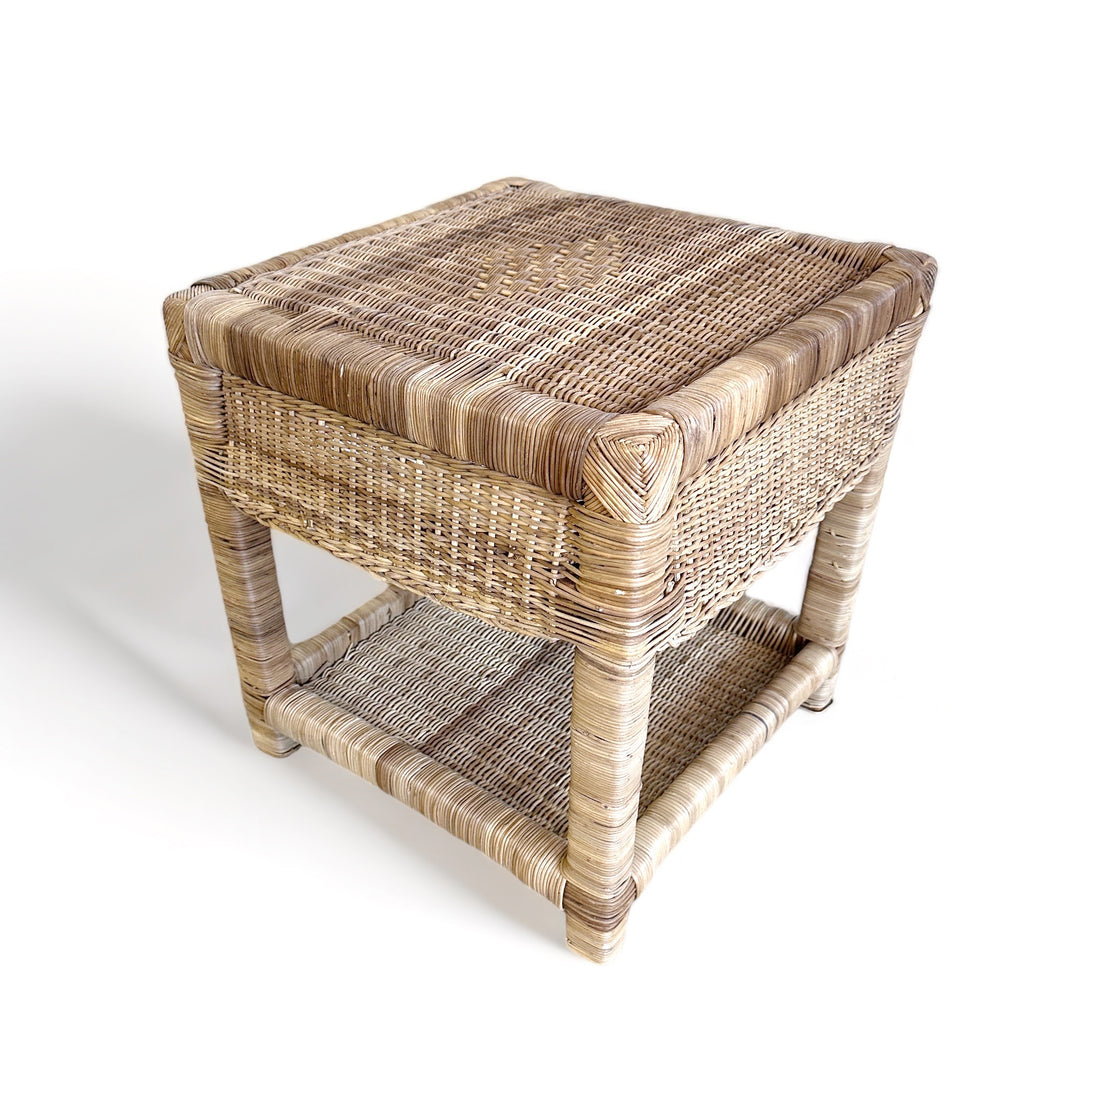 Malawi Side Tables - NEW